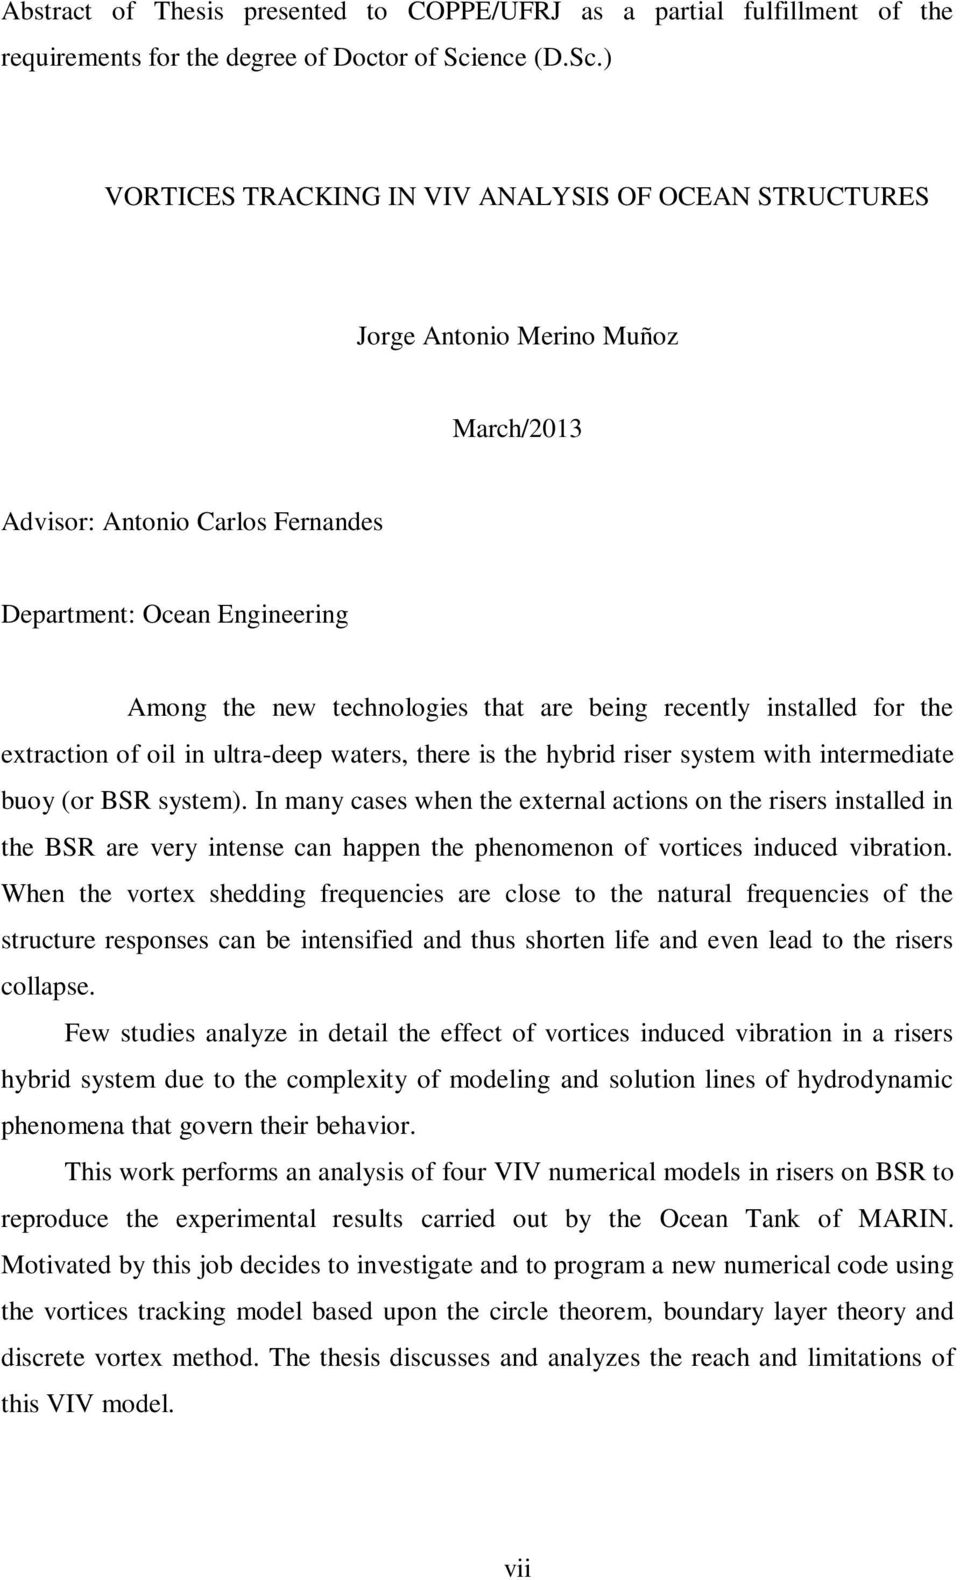 ) VORTICES TRACKING IN VIV ANALYSIS OF OCEAN STRUCTURES Jorge Antonio Merino Muño March/013 Advisor: Antonio Carlos Fernandes Department: Ocean Engineering Among the new technologies that are being